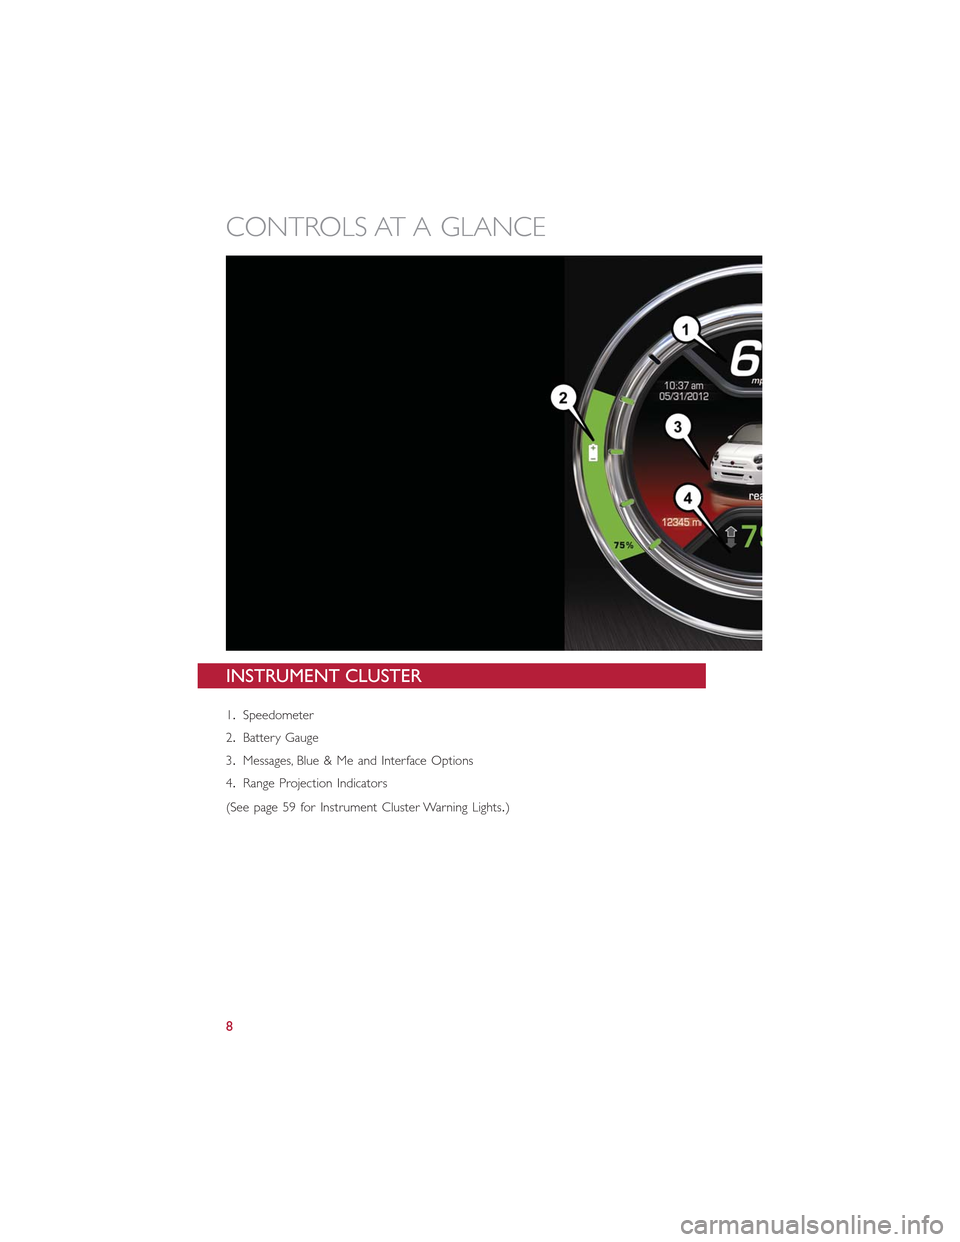 FIAT 500E 2015 2.G User Guide INSTRUMENT CLUSTER
1.Speedometer
2.Battery Gauge
3.Messages, Blue & Me and Interface Options
4.Range Projection Indicators
(See page 59 for Instrument Cluster Warning Lights.)
CONTROLS AT A GLANCE
8 